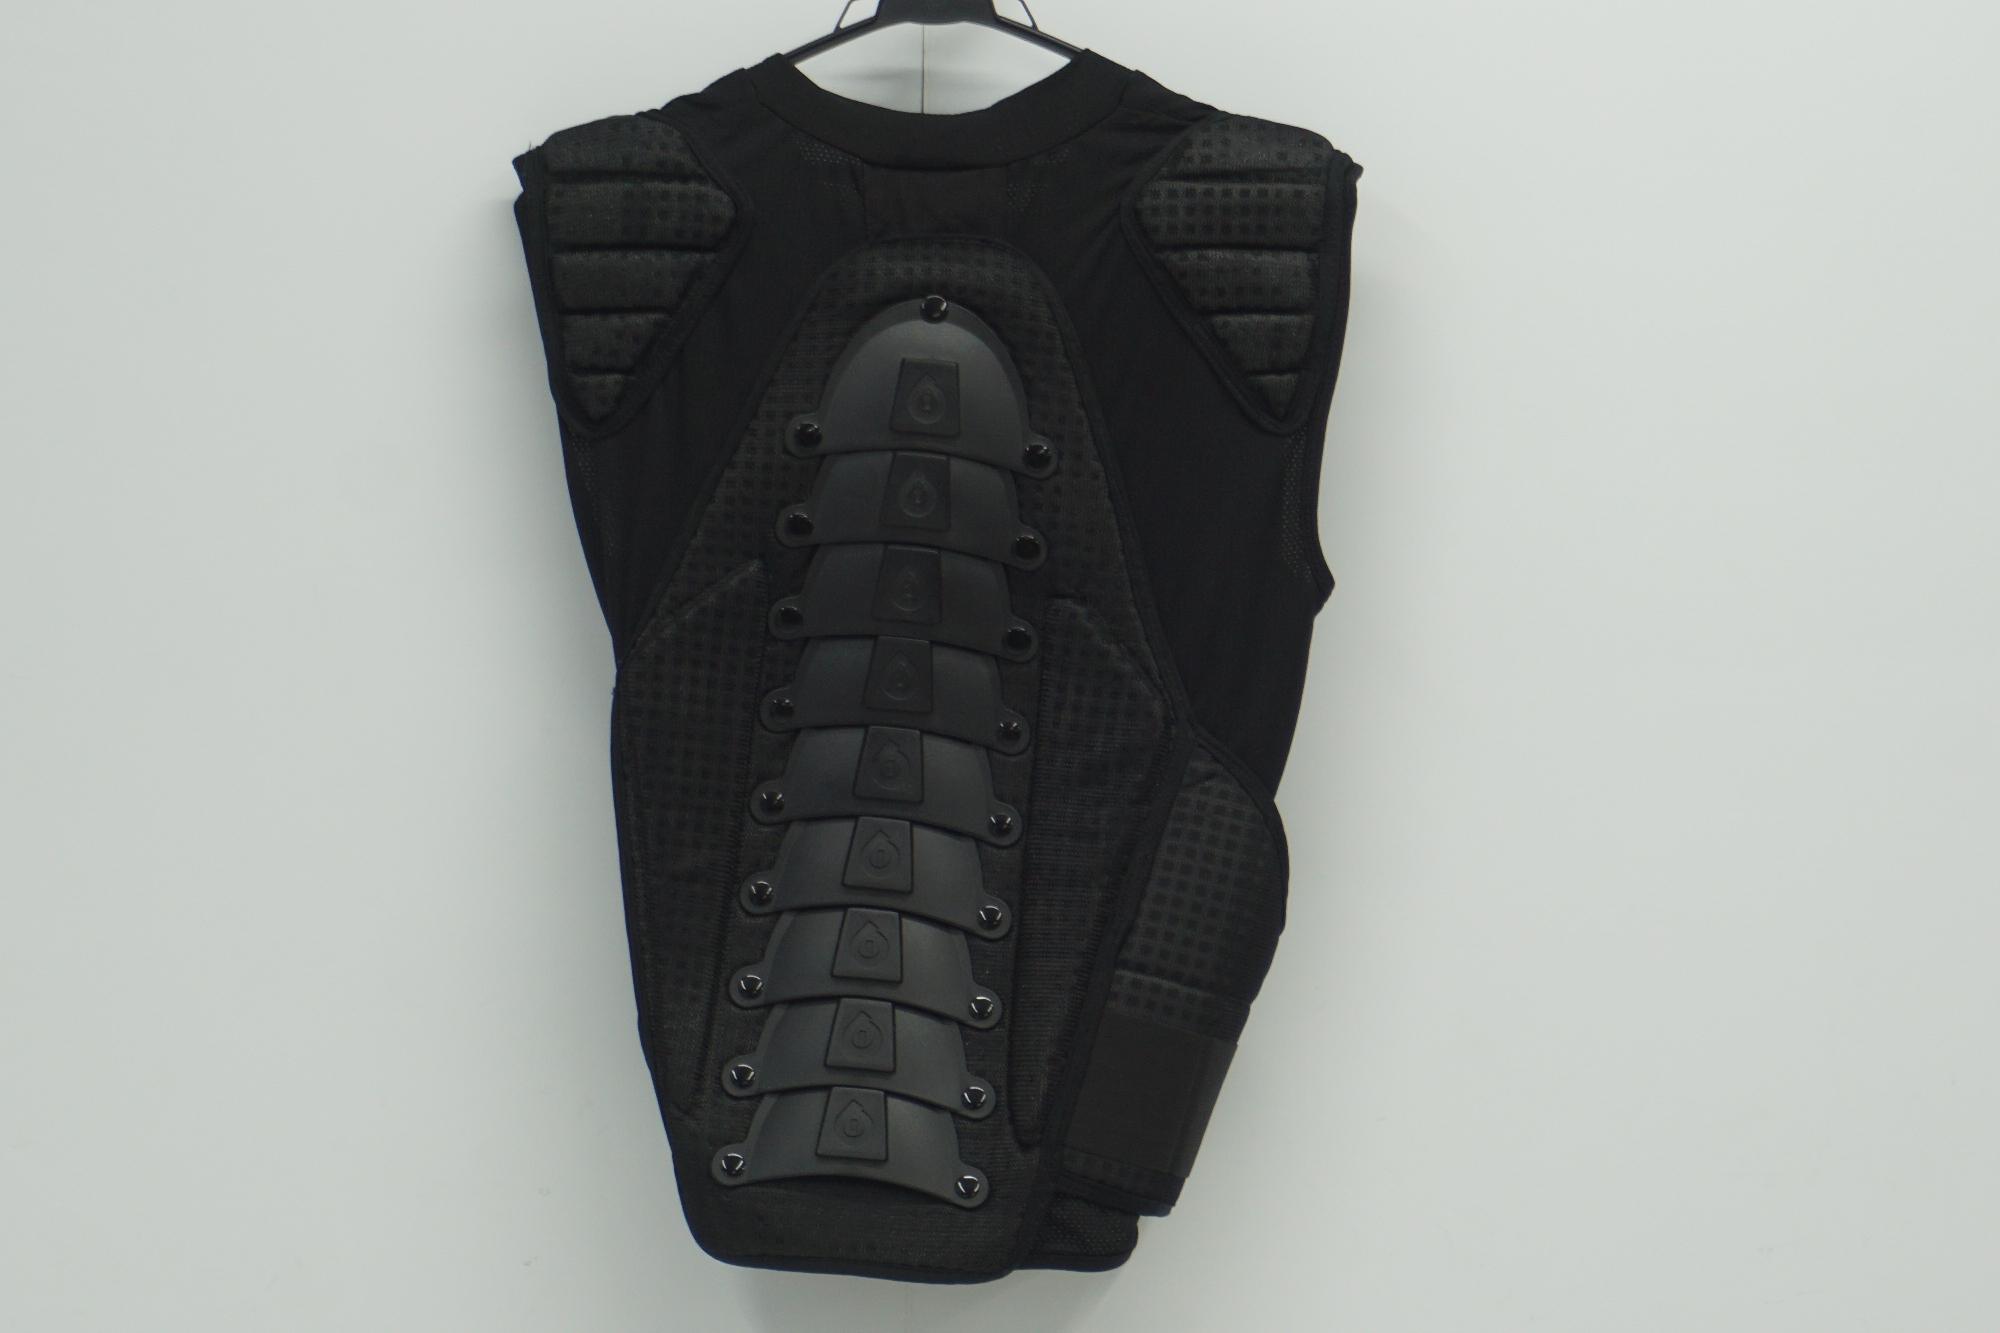 SIXSIX ONE [ Schic s Schic s one ] L-XL size chest protector / Kyoto Hachiman shop 